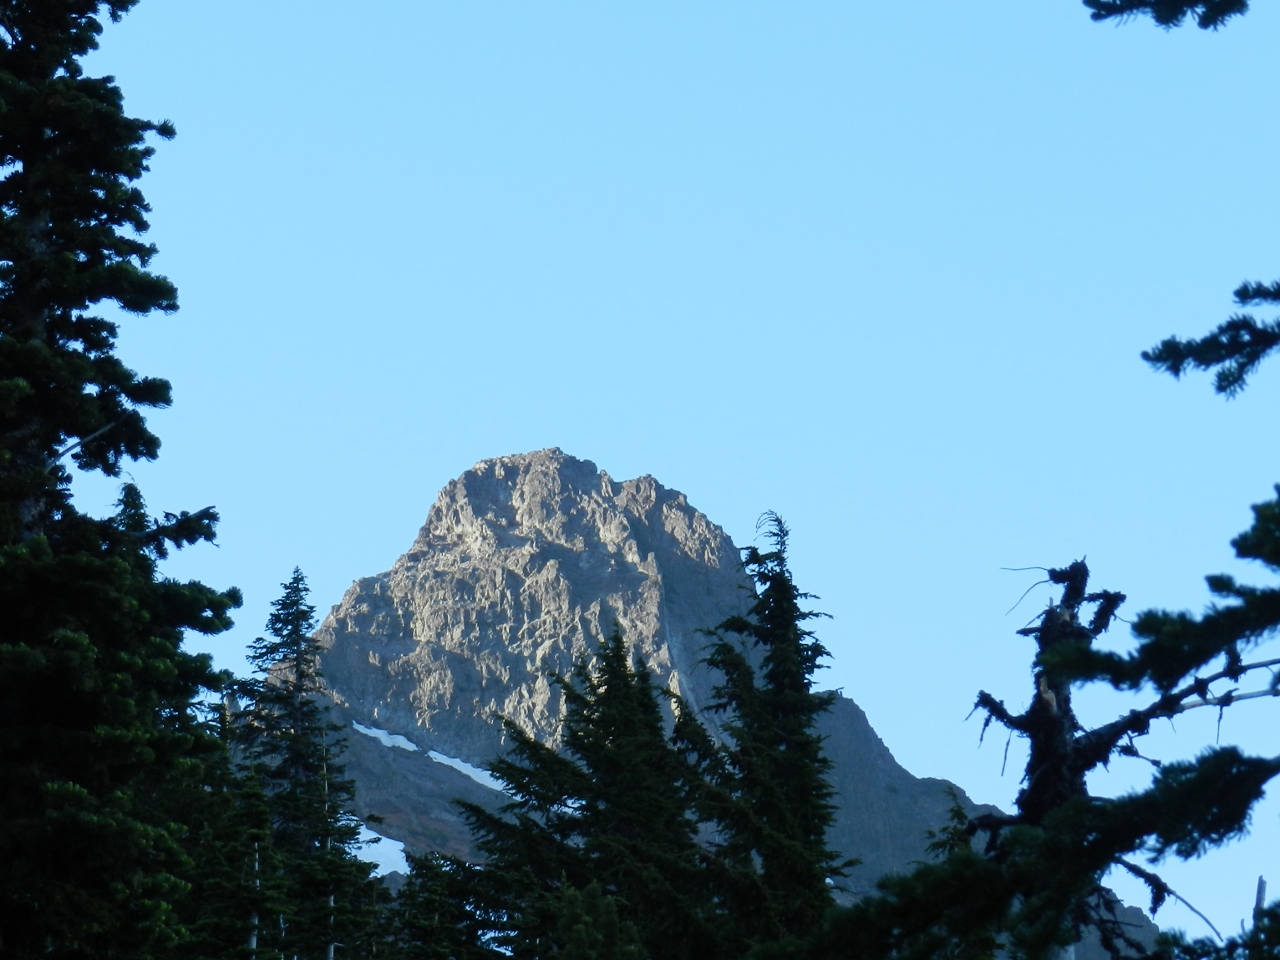 View of the peak from the climbers trail